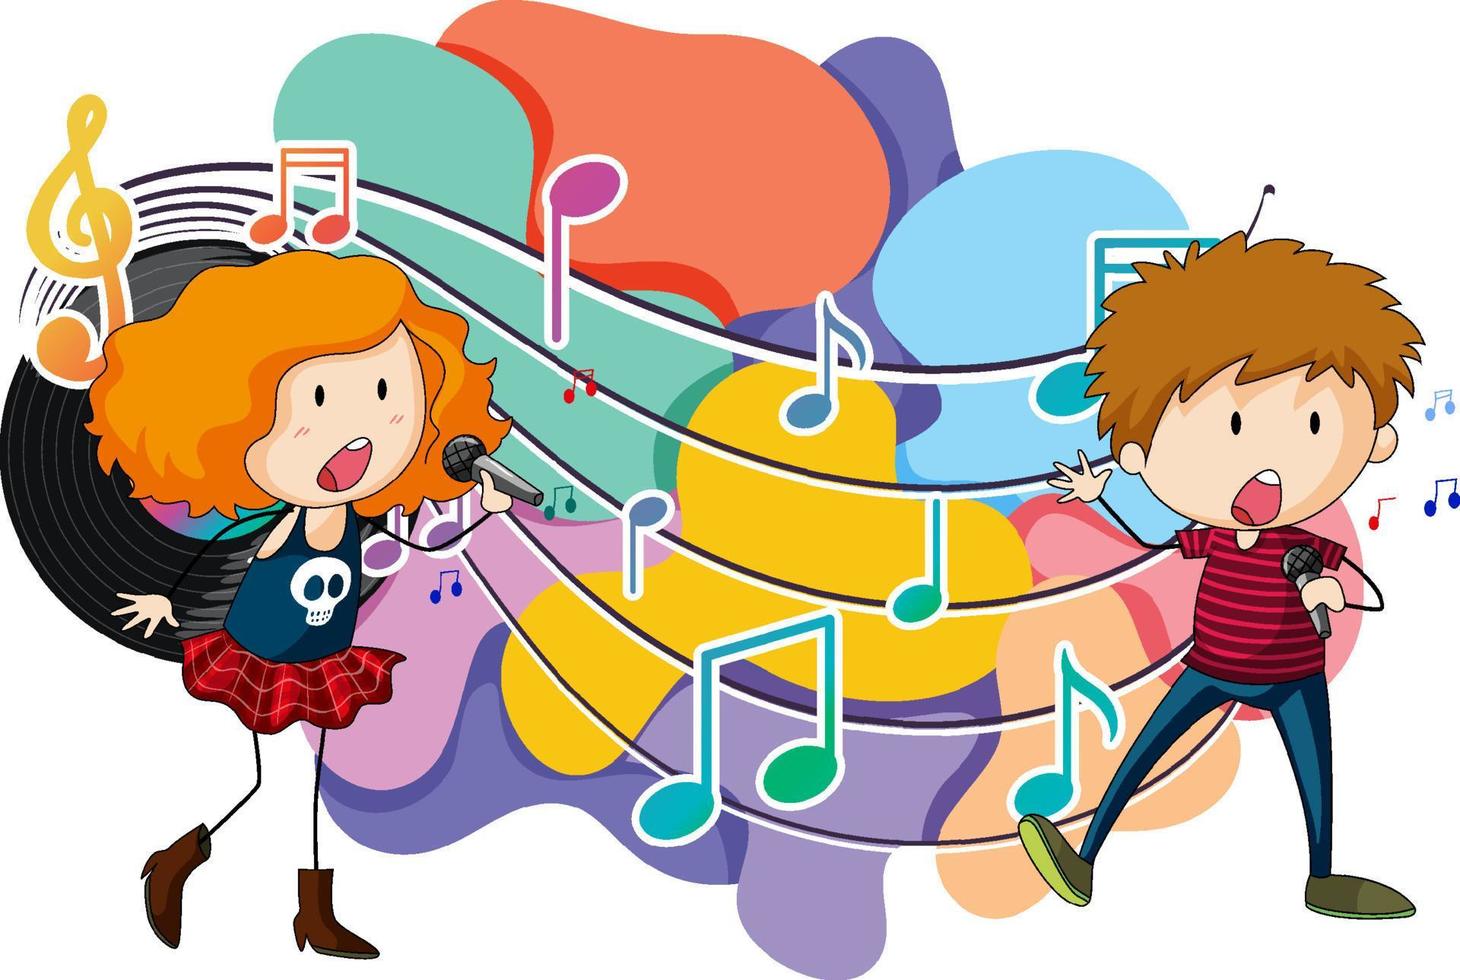 Singer boy and girl cartoon with music melody symbols vector